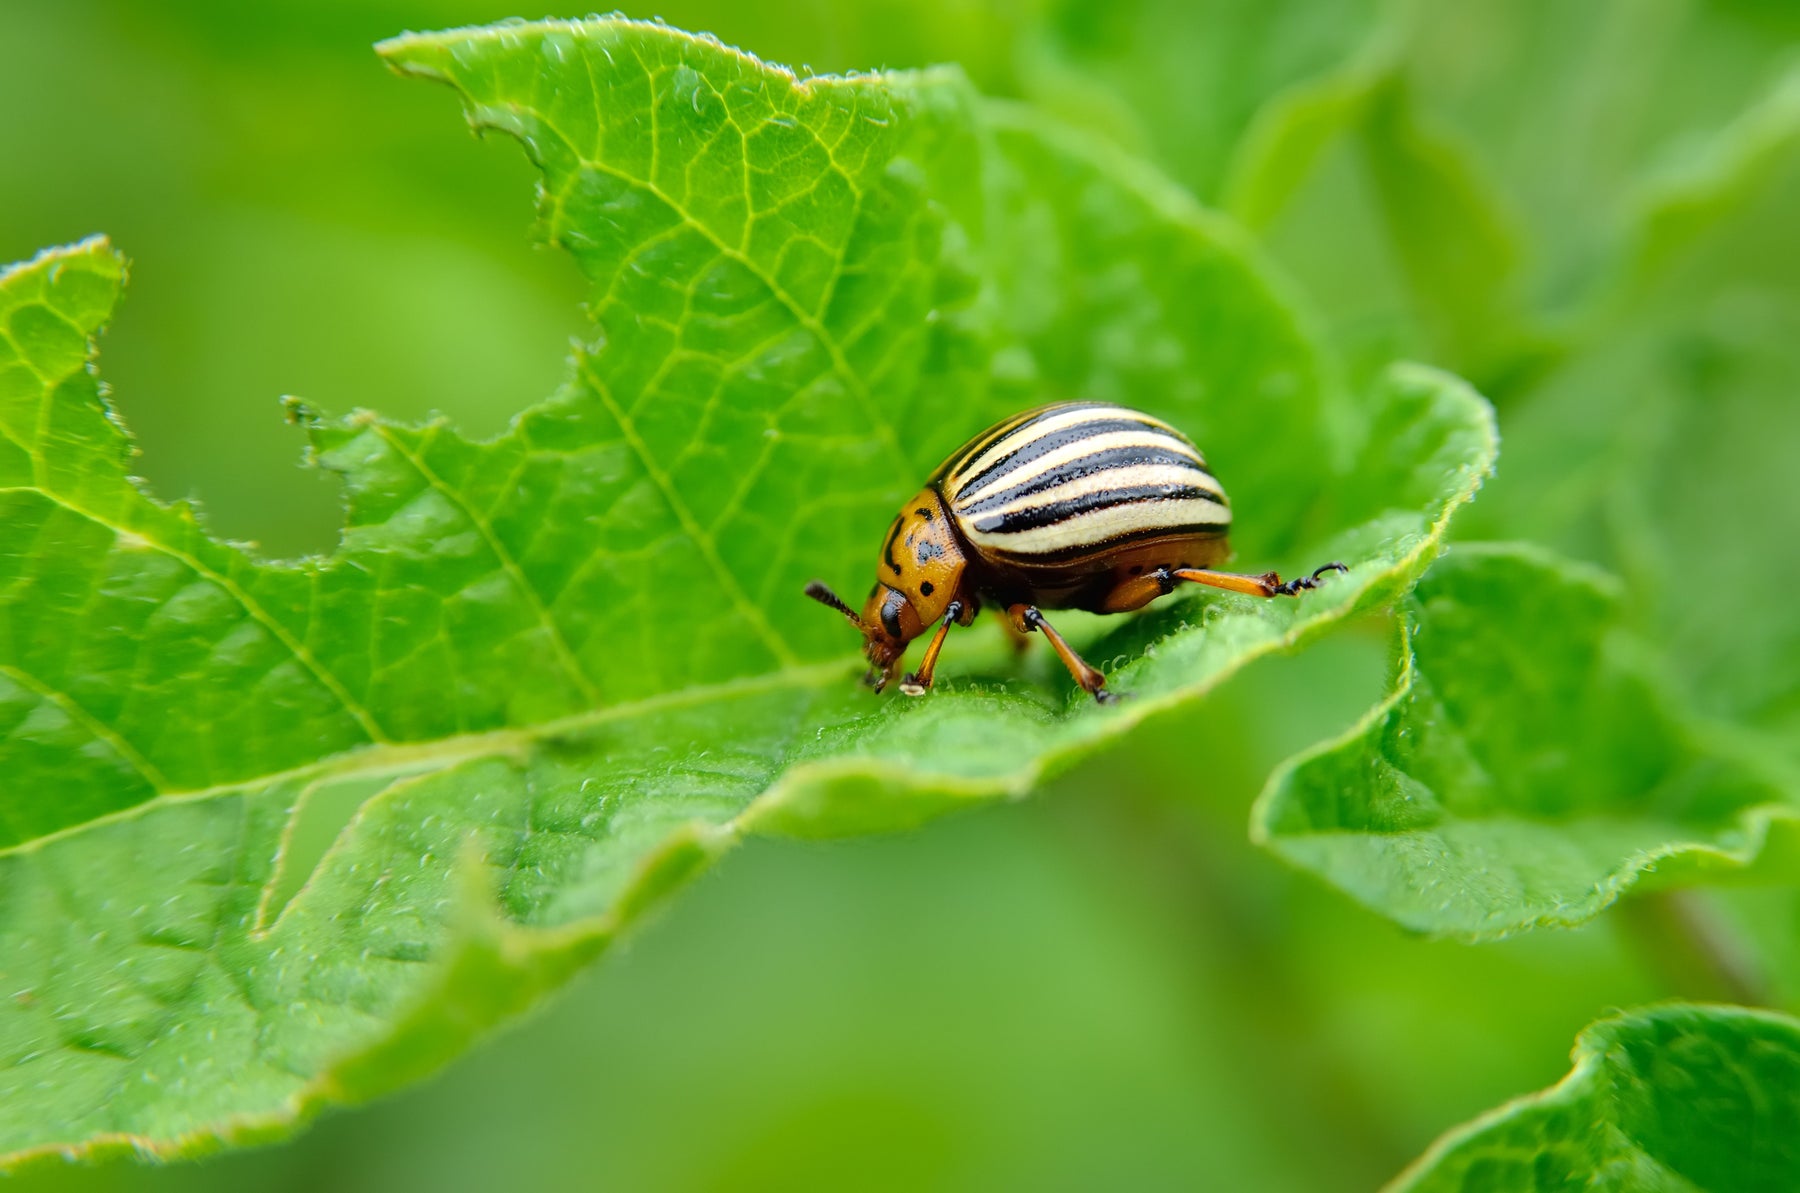 5 Common Garden Pests and How to Get Rid of Them